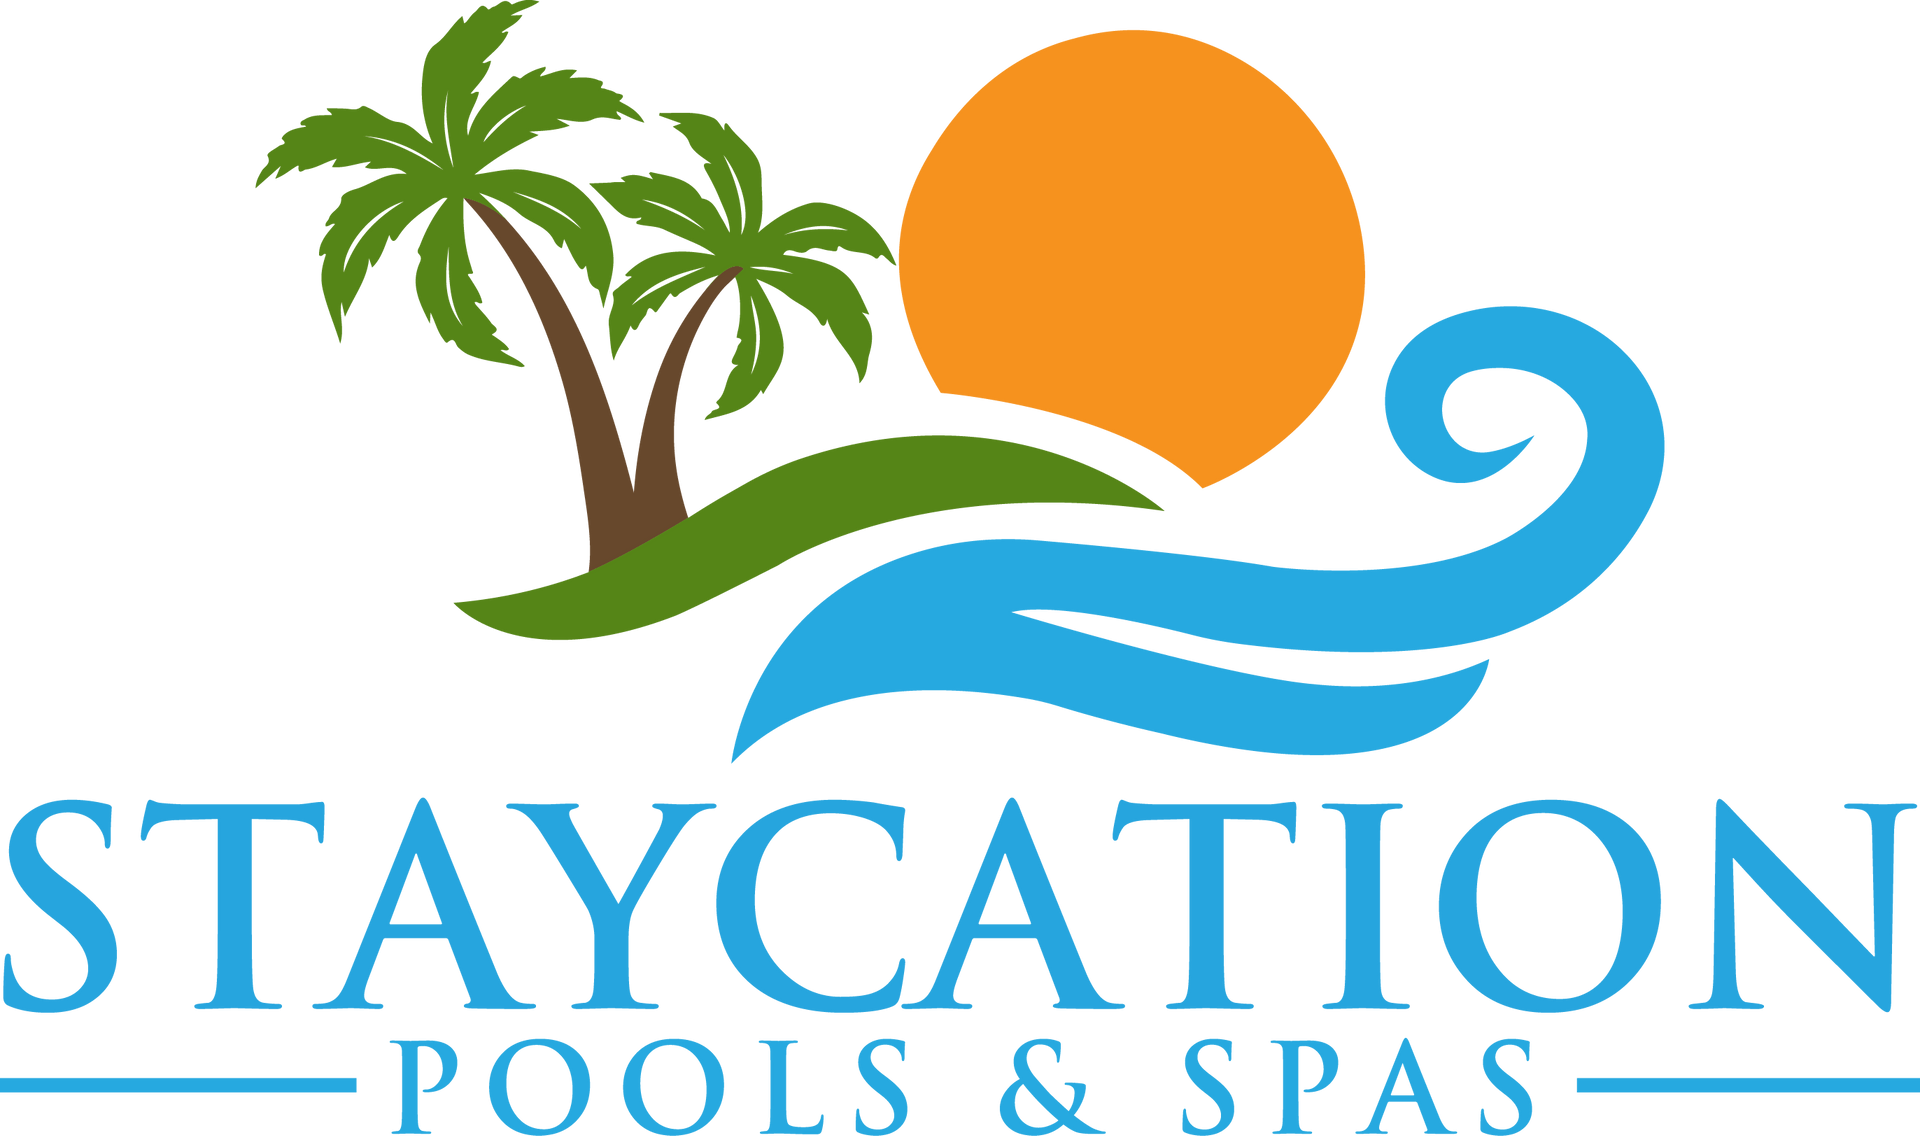 Staycation Pools and Spas LLC